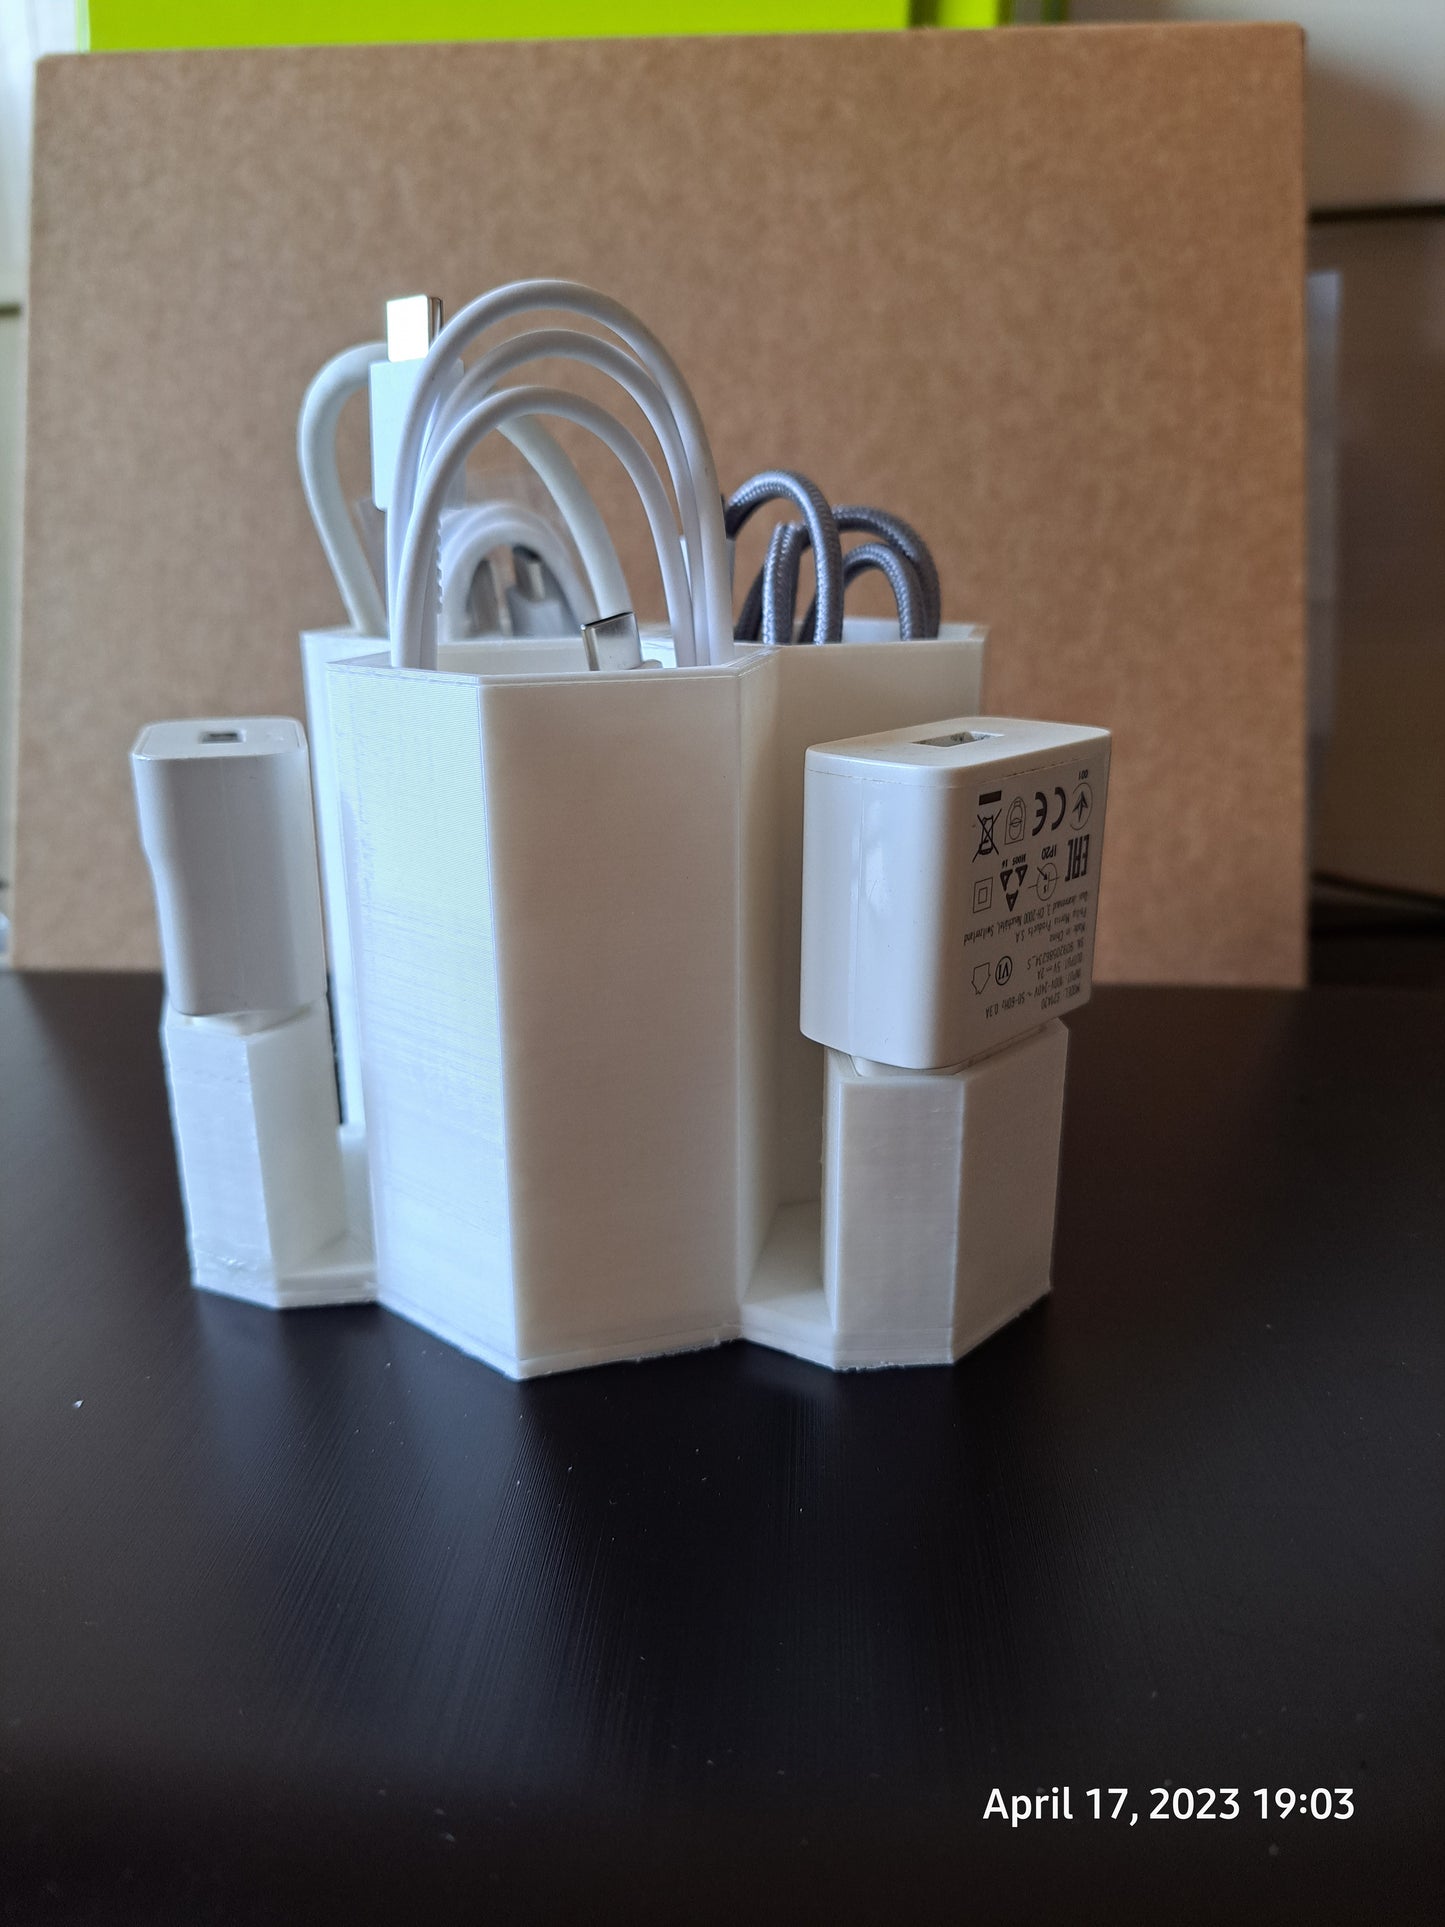 USB Cable and Charger Organizer